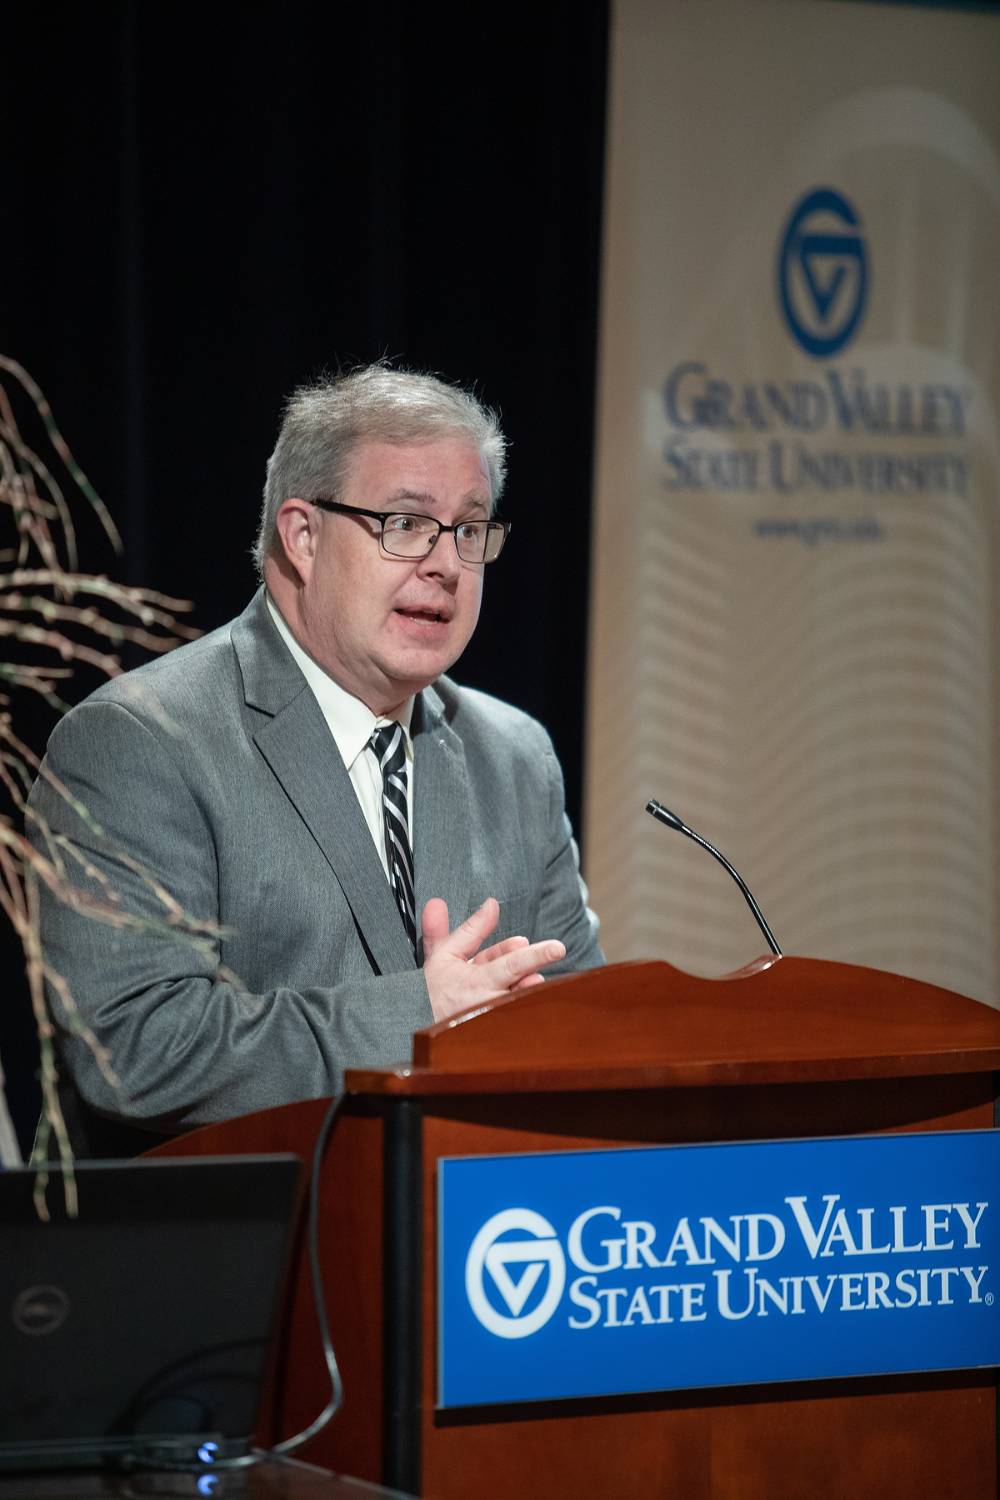 Man speaking at a GVSu podium, looking out into the audience